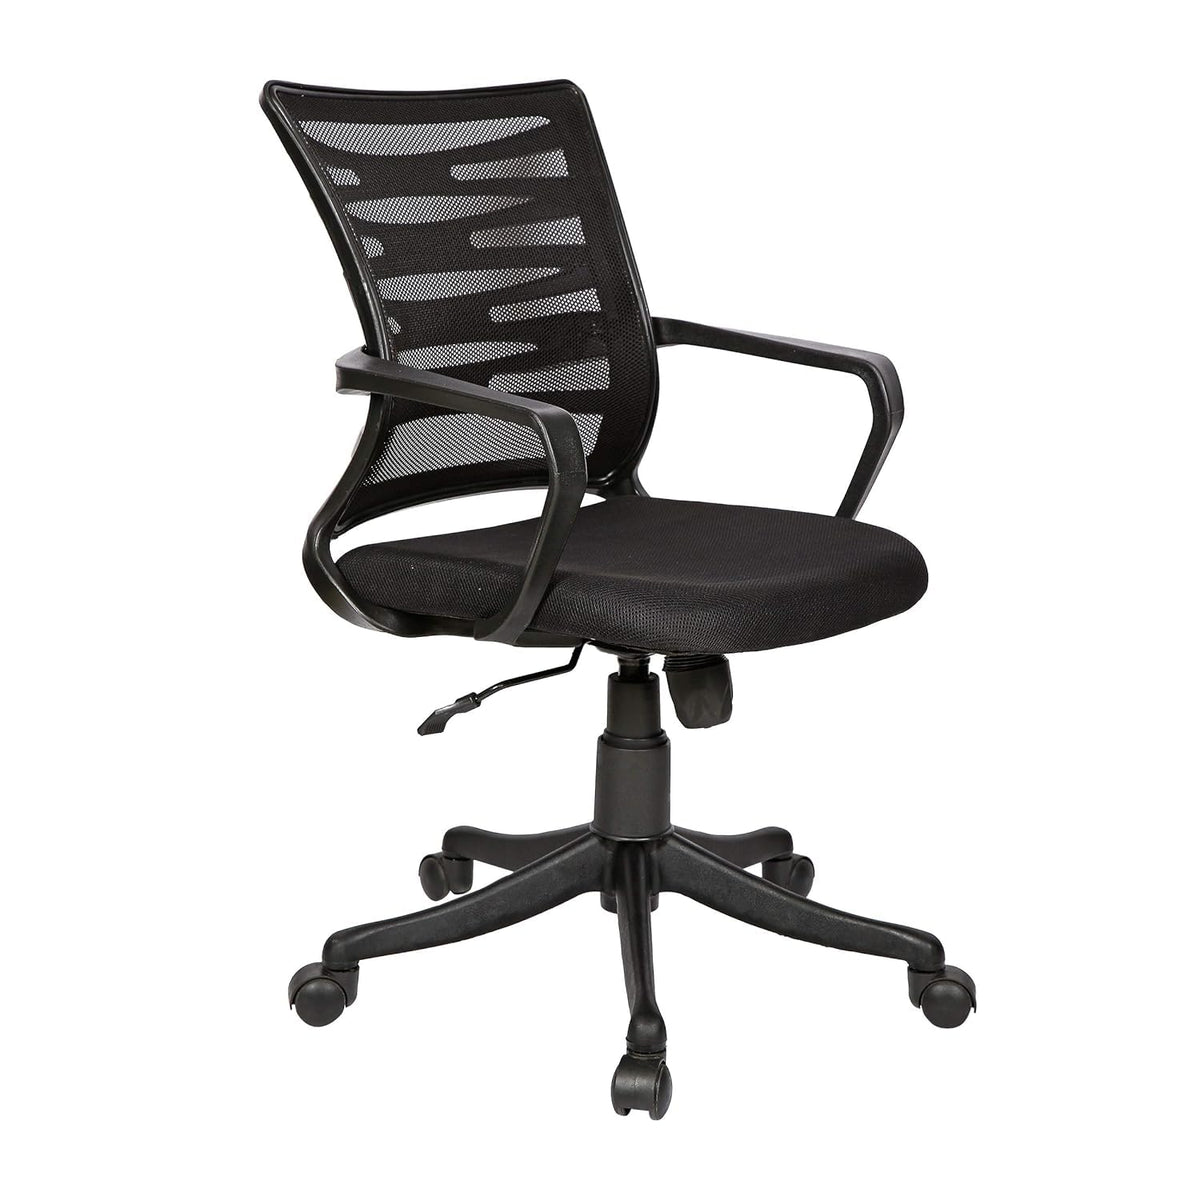 SmileSellers Zig Zag Mesh Mid-Back Ergonomic Desk Office Chair with Tilting Mechanism, Comfortable Seat, and Revolving Heavy Duty Metal Base | Ideal for Work from Home & Study